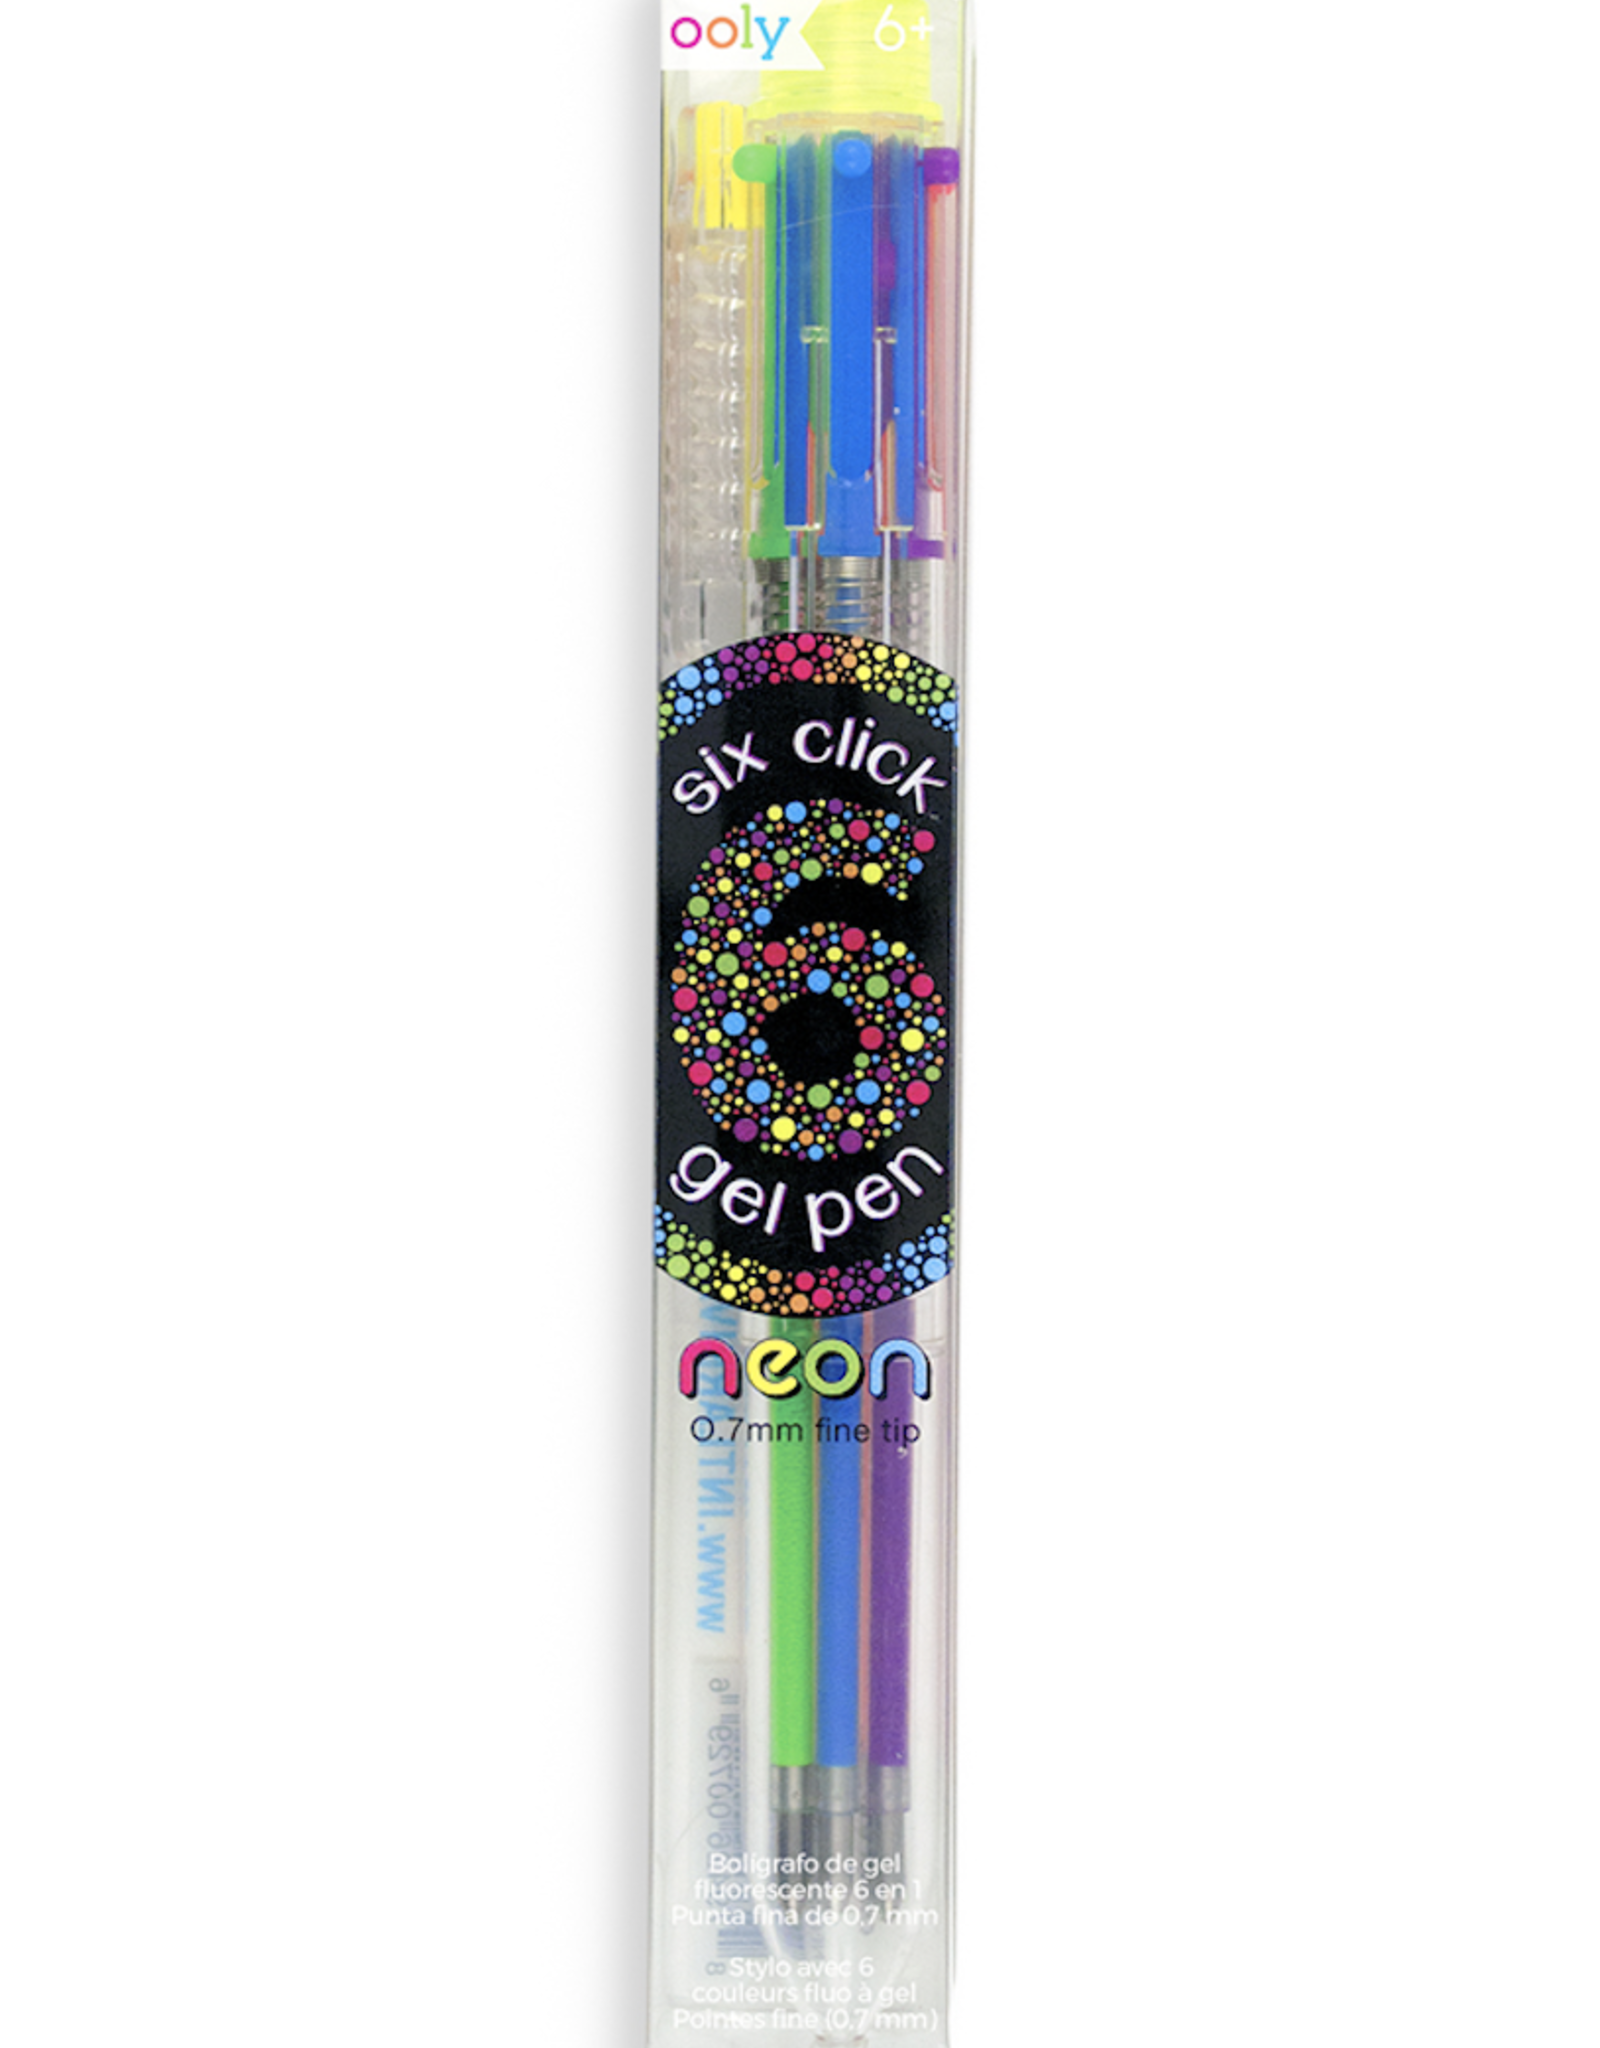 Ooly Six Click Colored Gel Pen - Neon